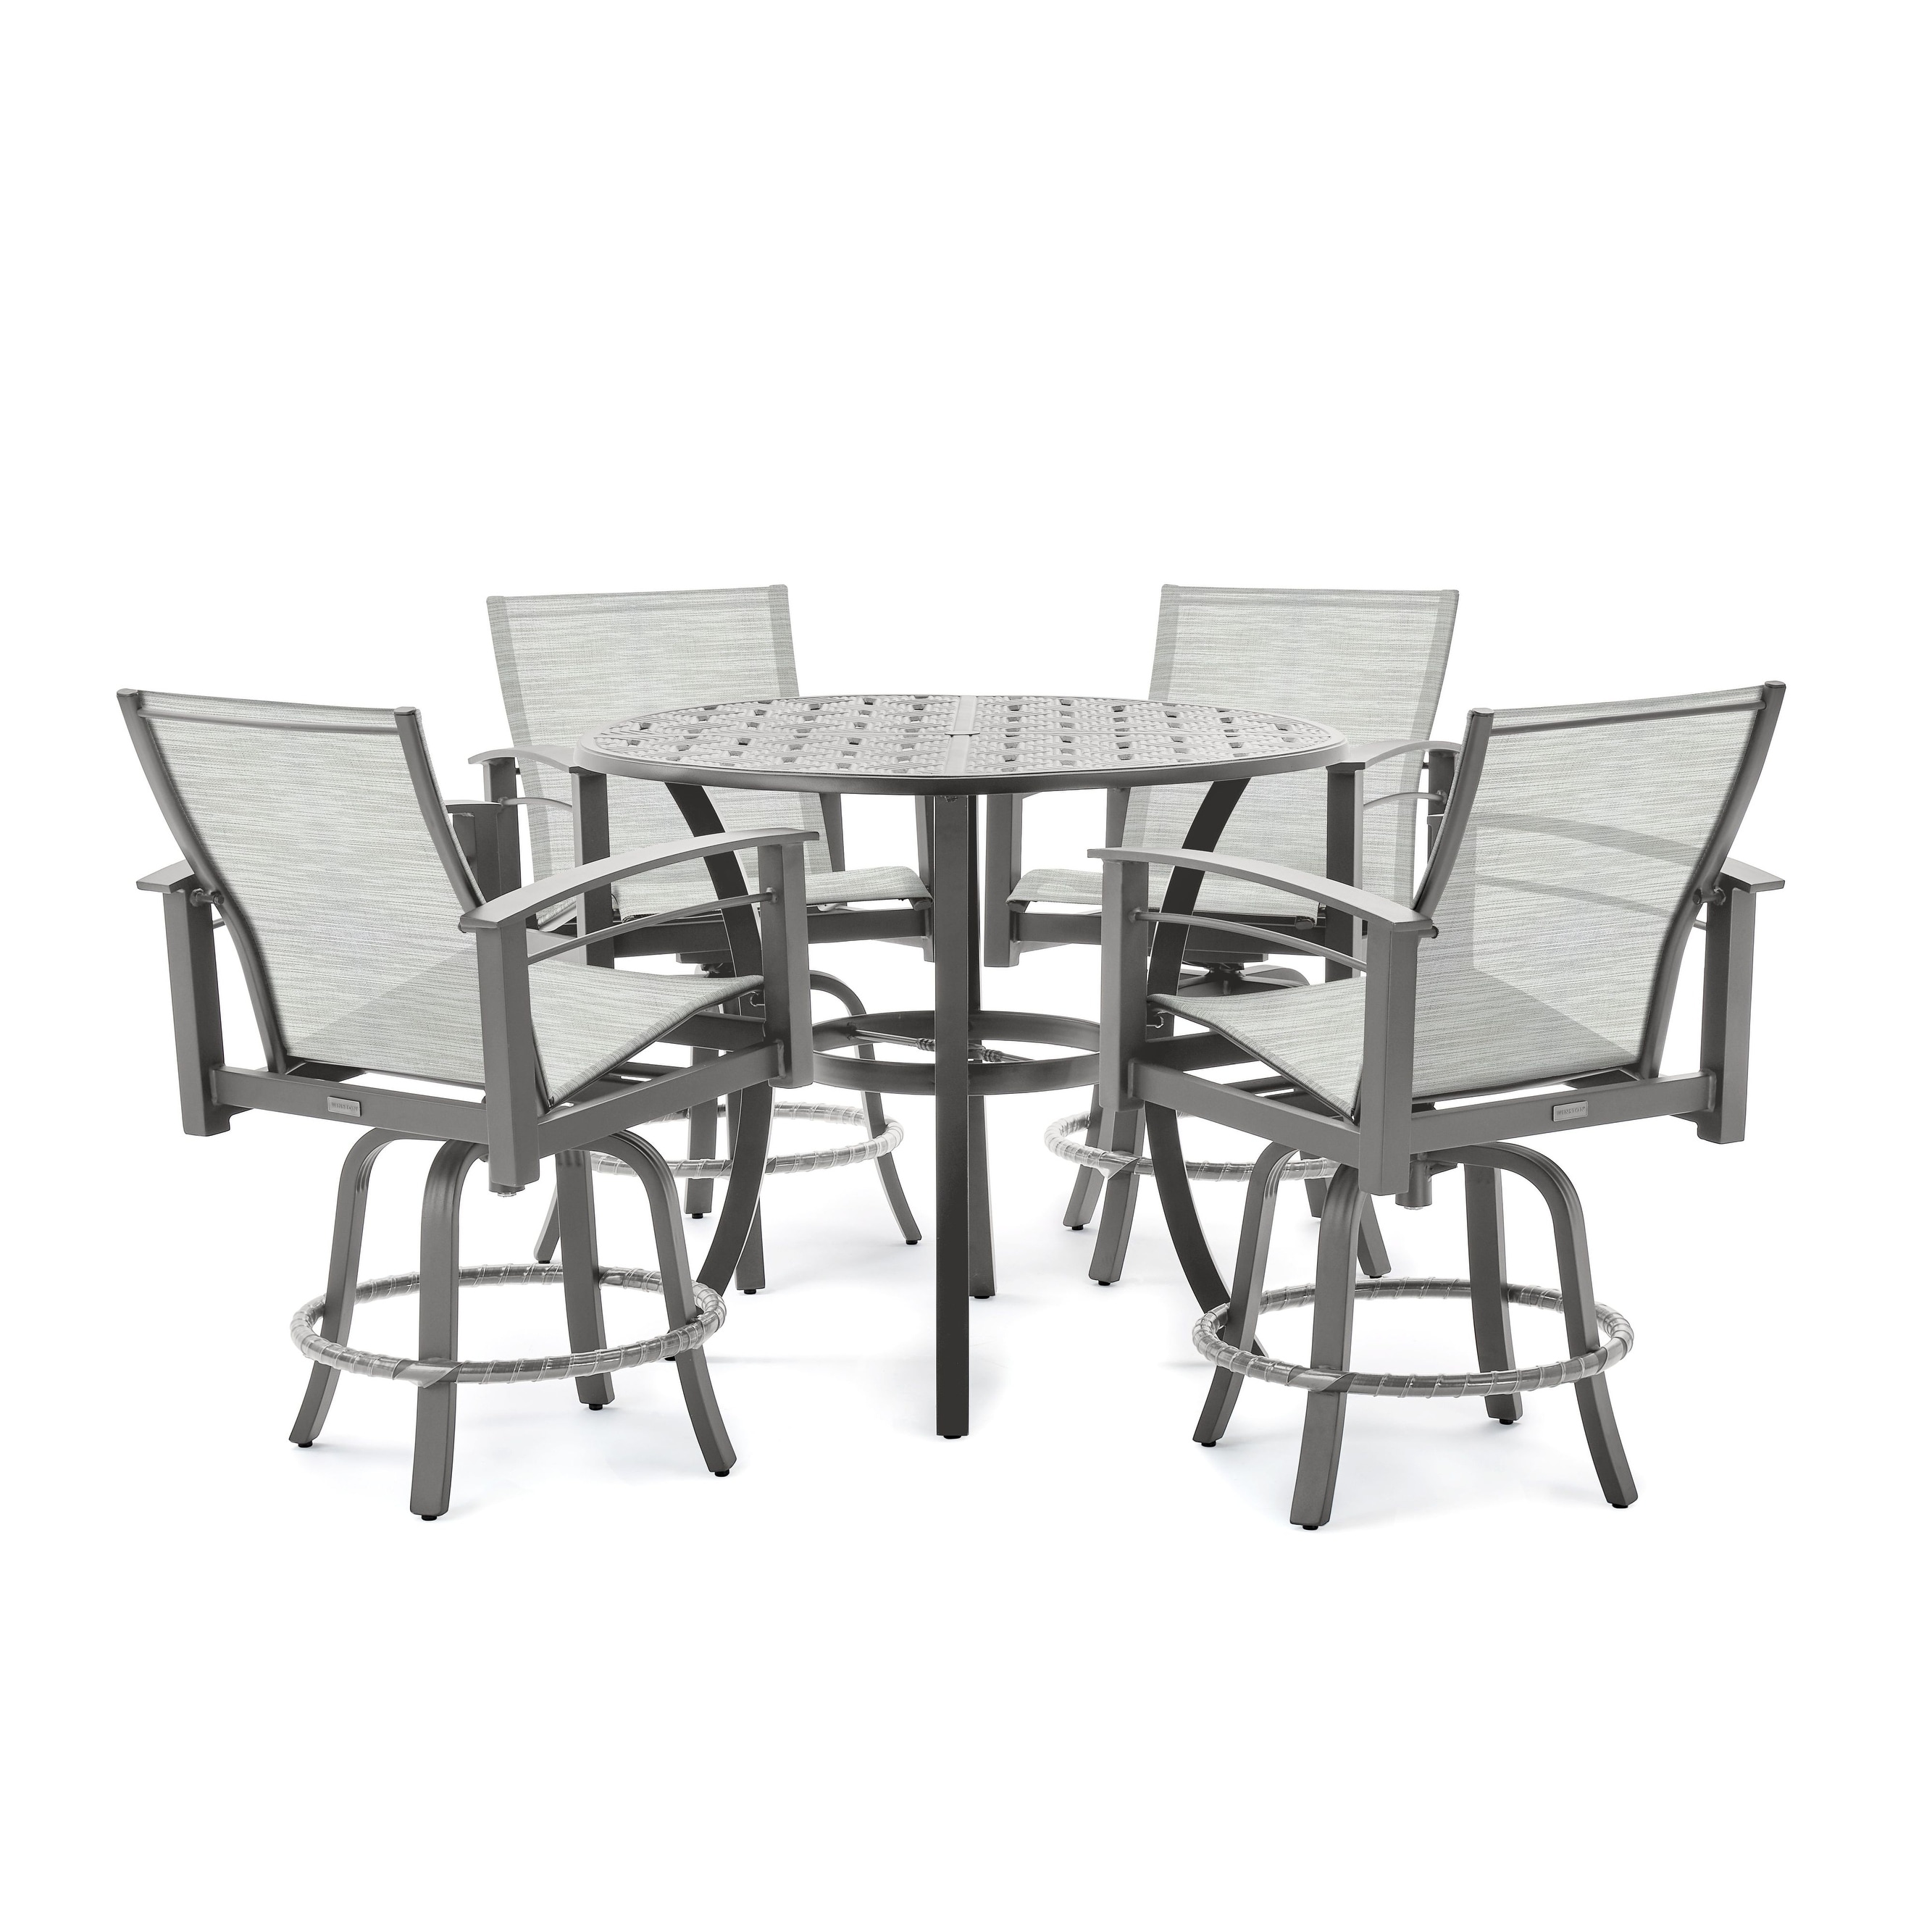 Stanford Sling 5pc Balcony Set (4 Swivel Chairs  Round Table)